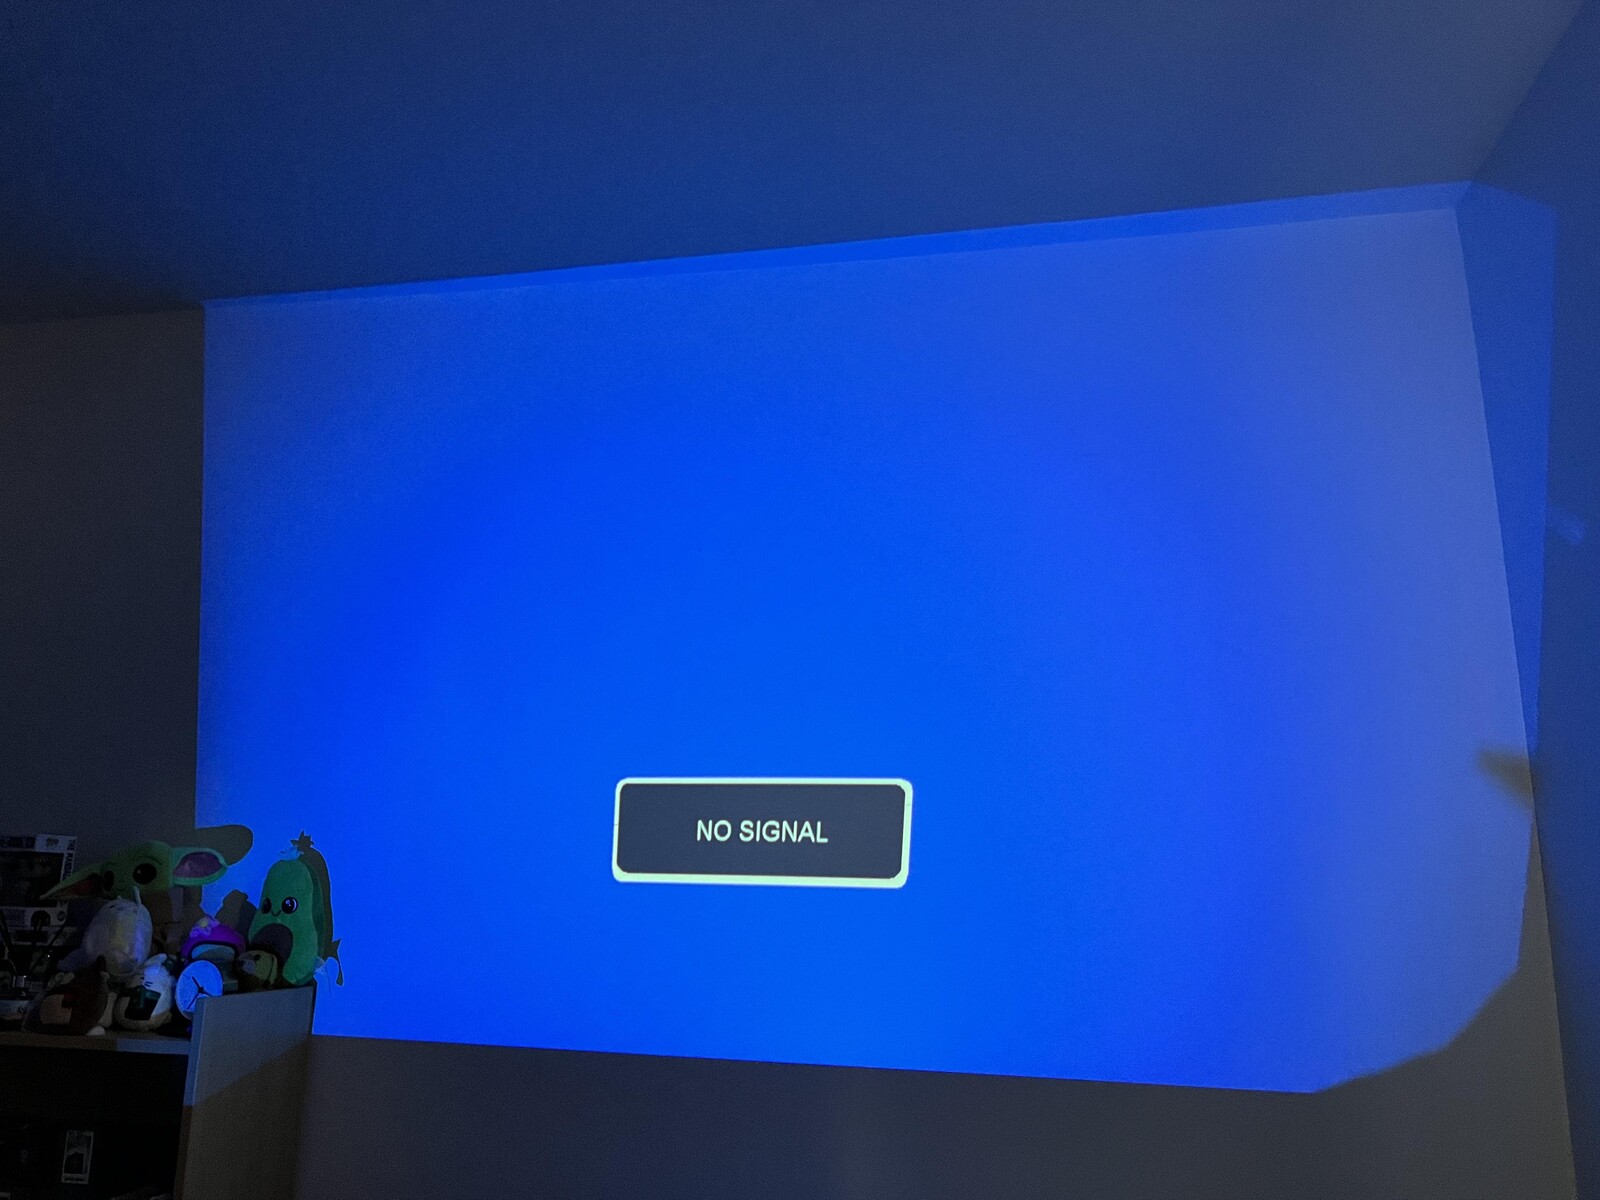 Why My Projector Says No Signal